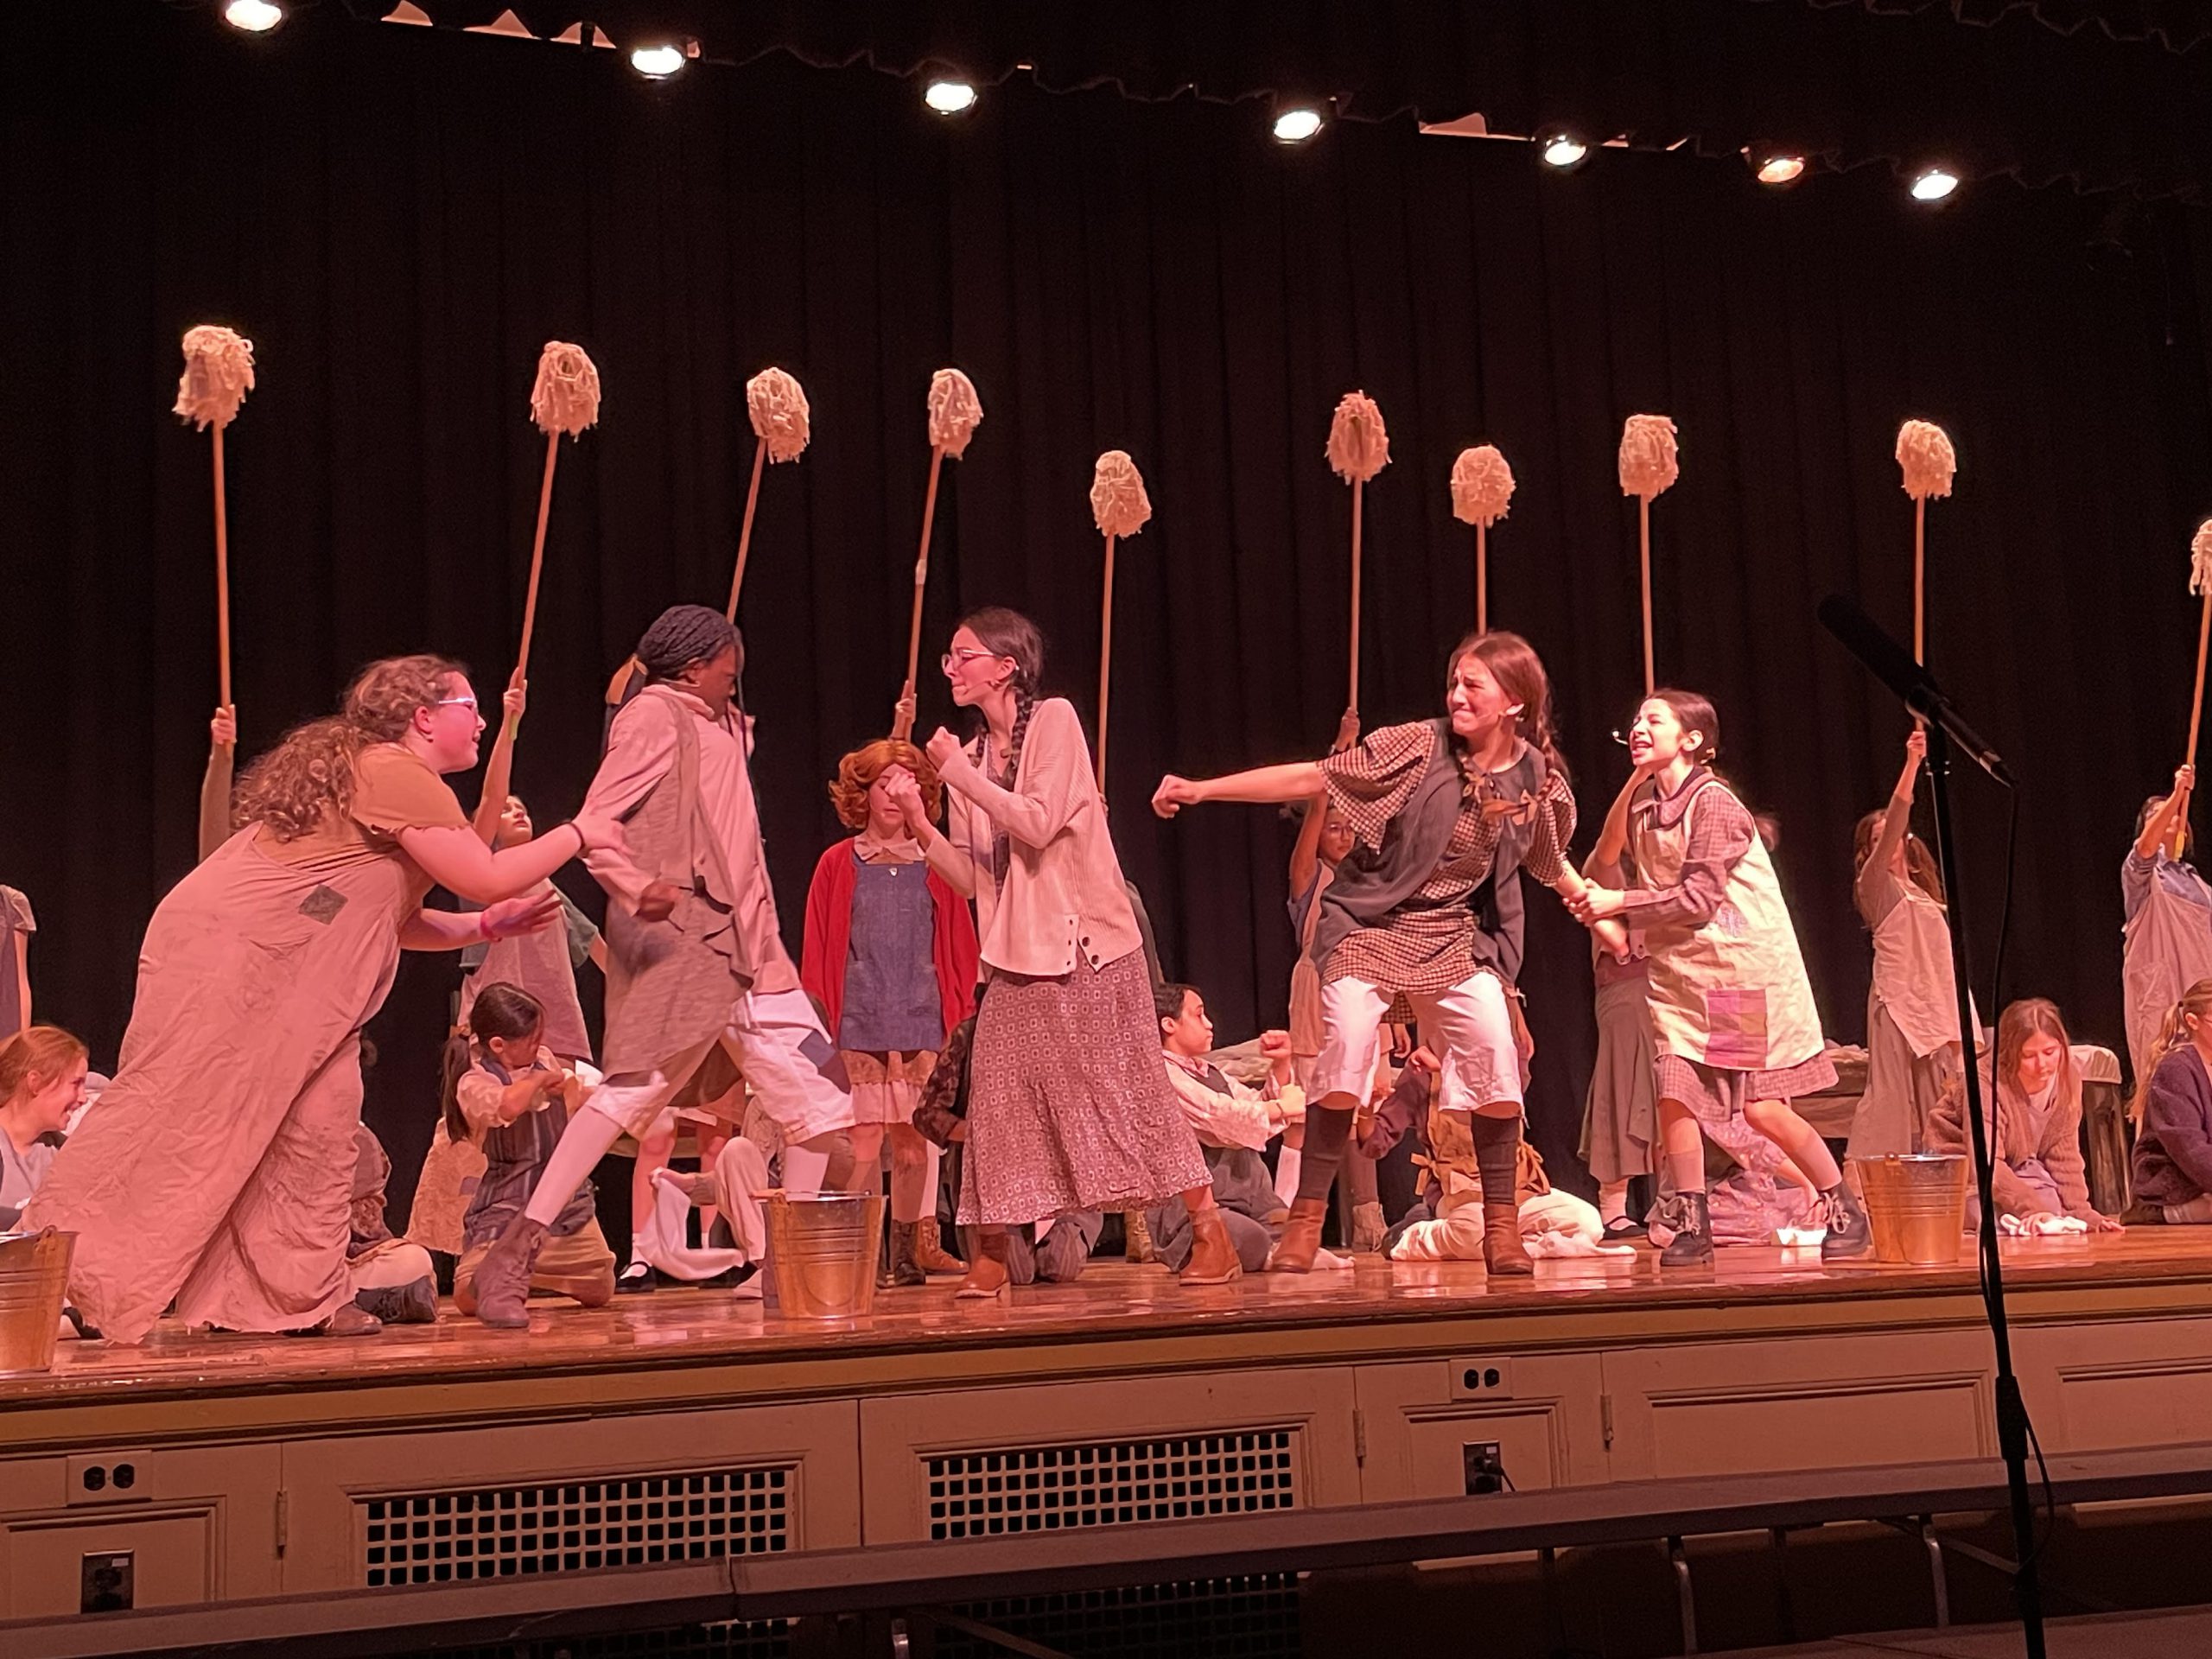 The middle school students playing the orphans in the Annie Jr. musical dance together with mops and buckets.